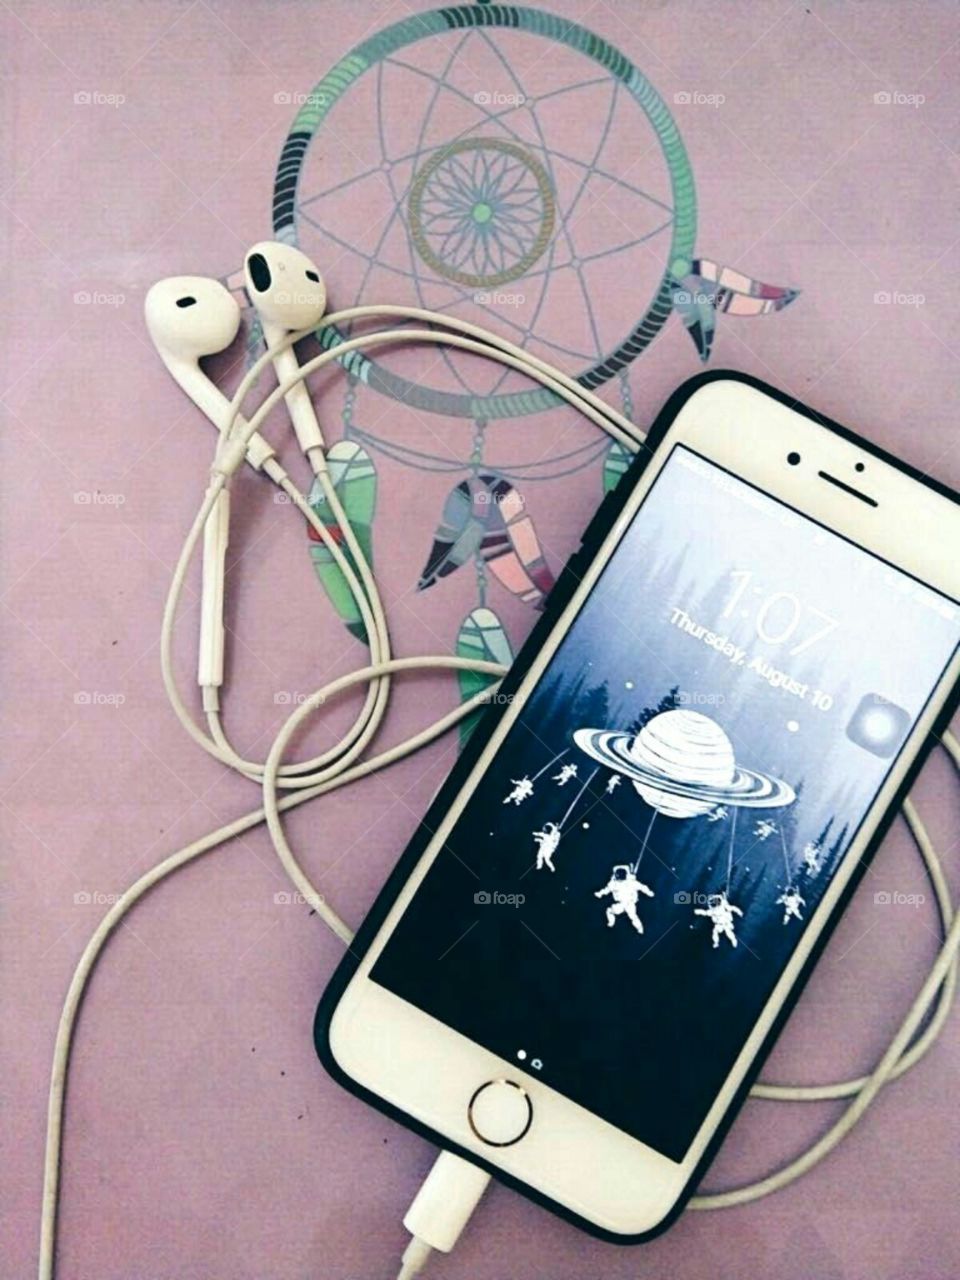 maybe need earphone to enjoy a song